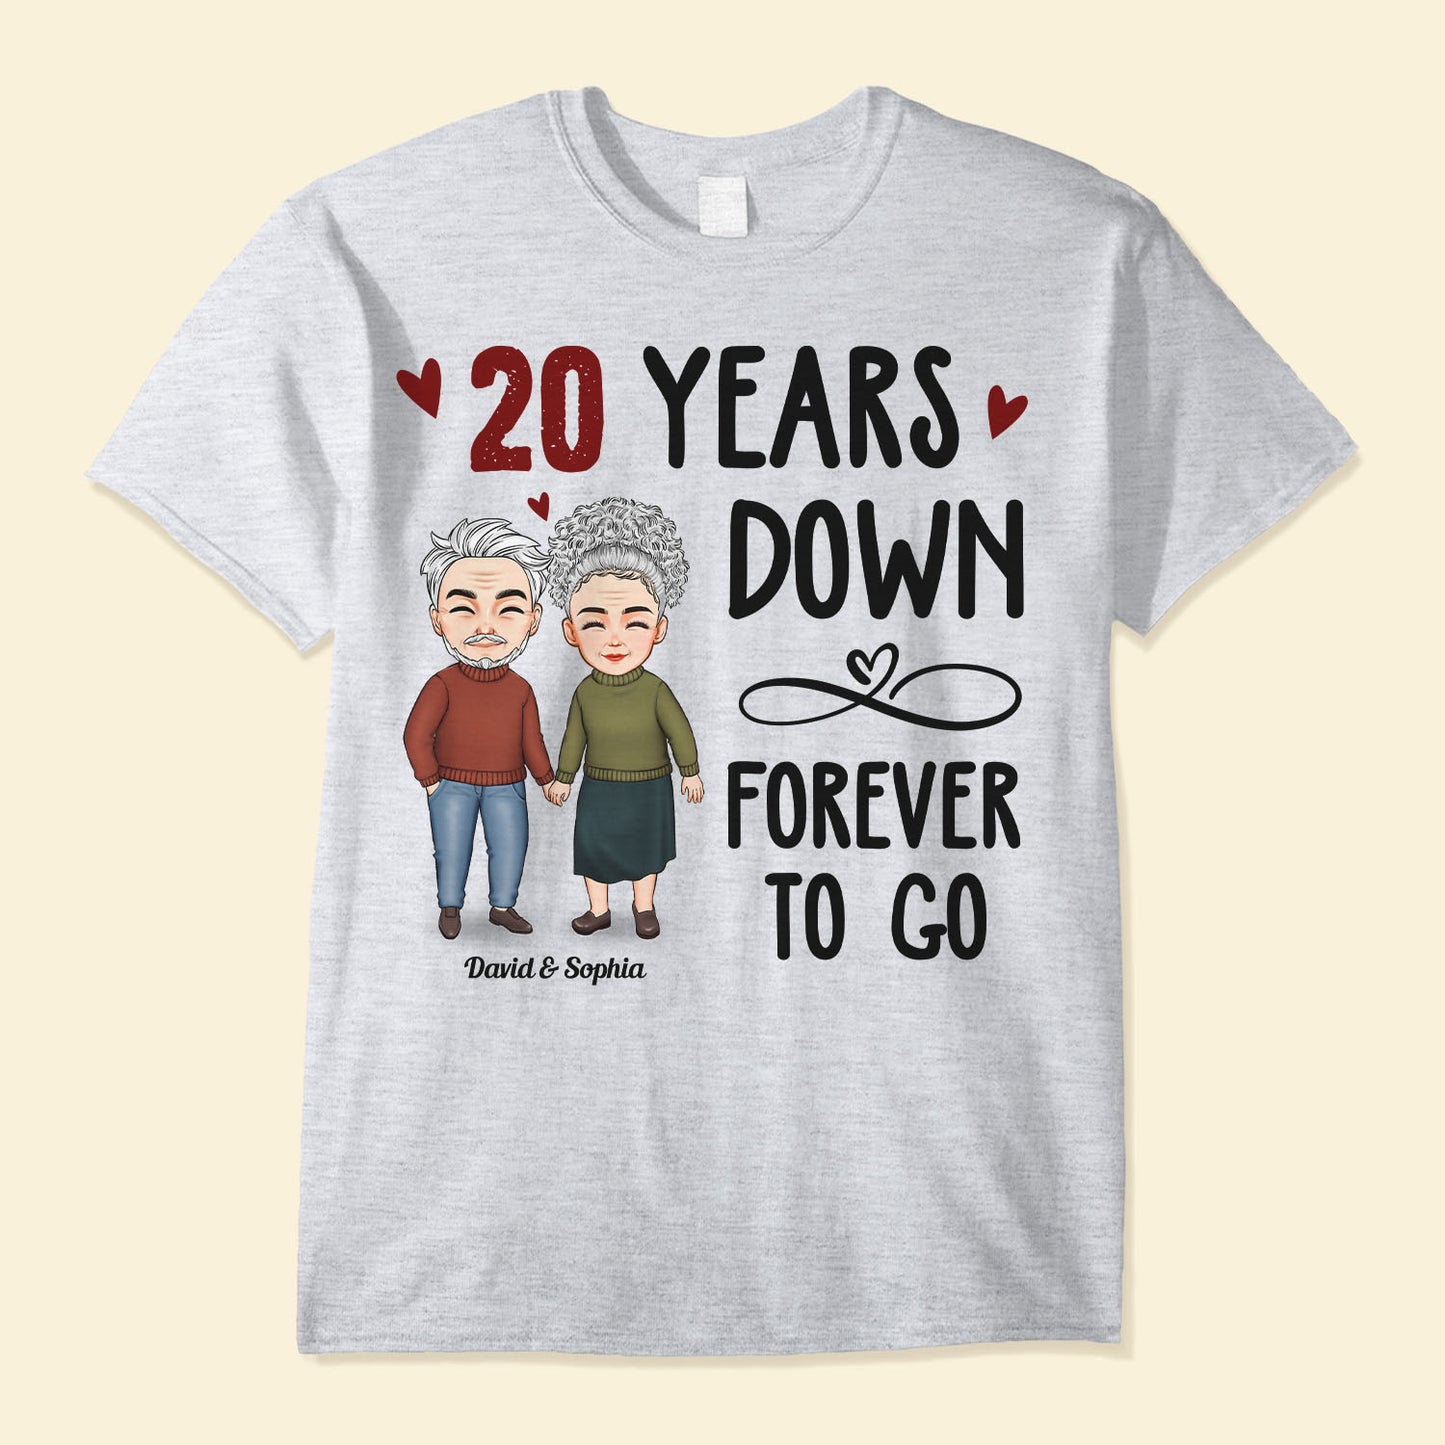 Years Down Forever To Go - Personalized Shirt